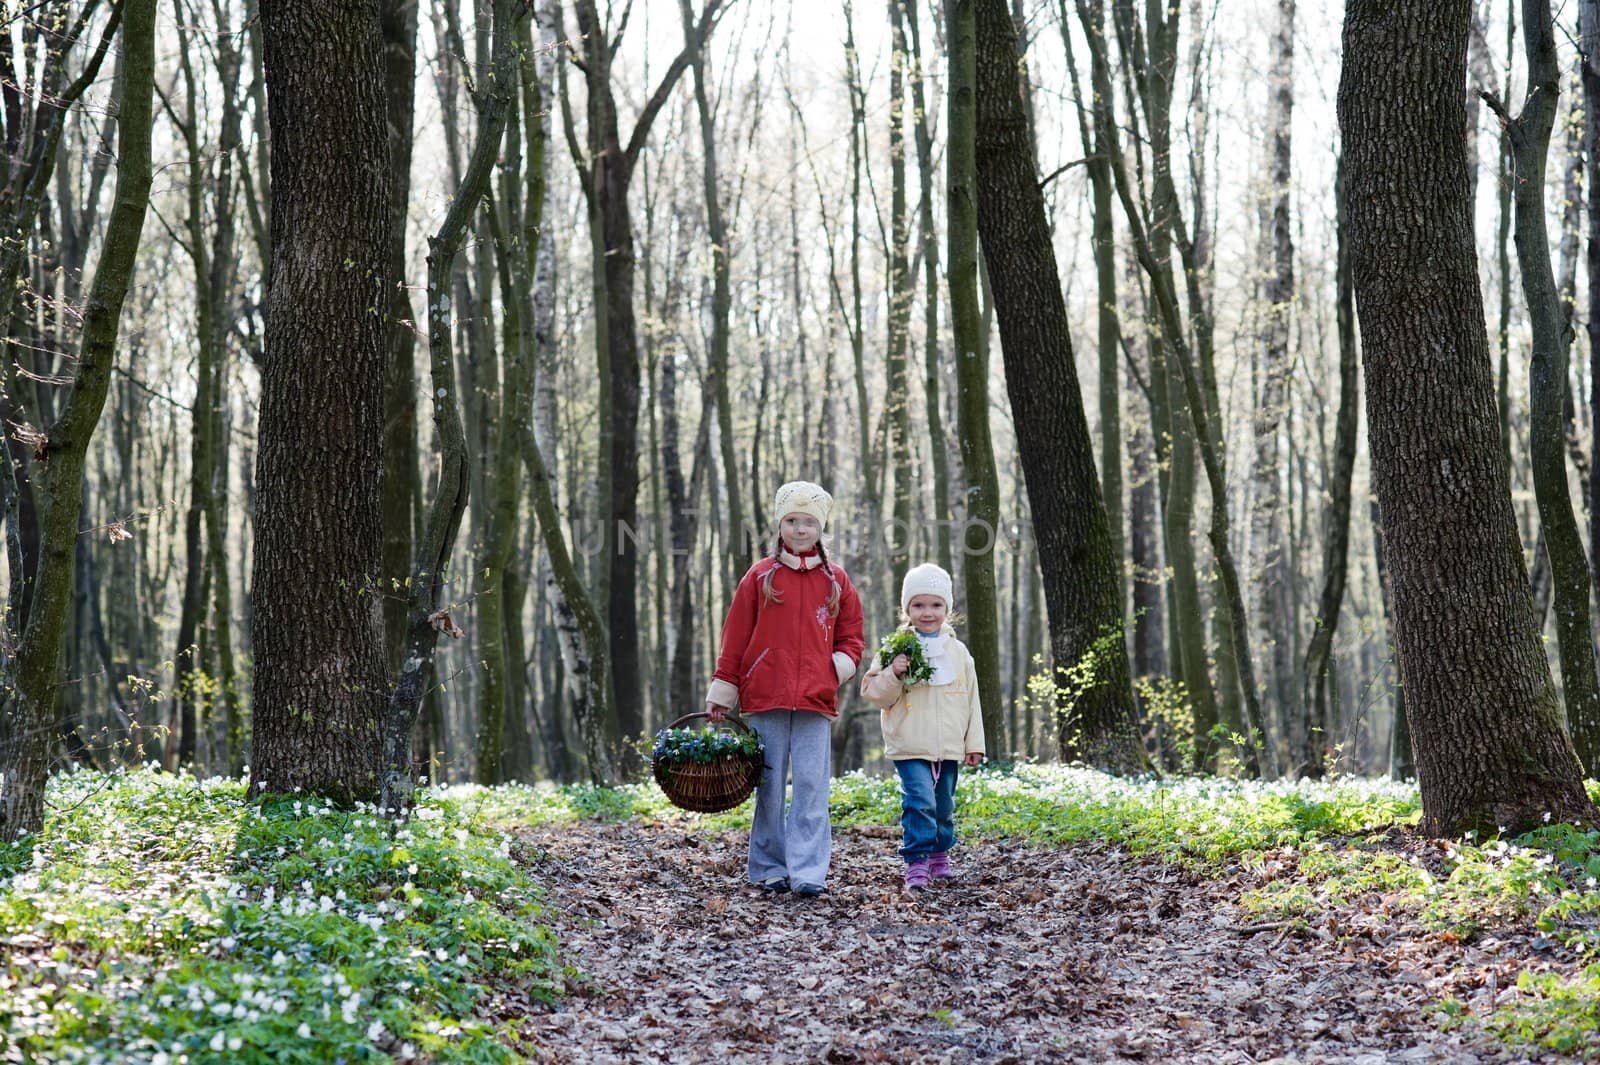 An image of two sisters walking n the wood